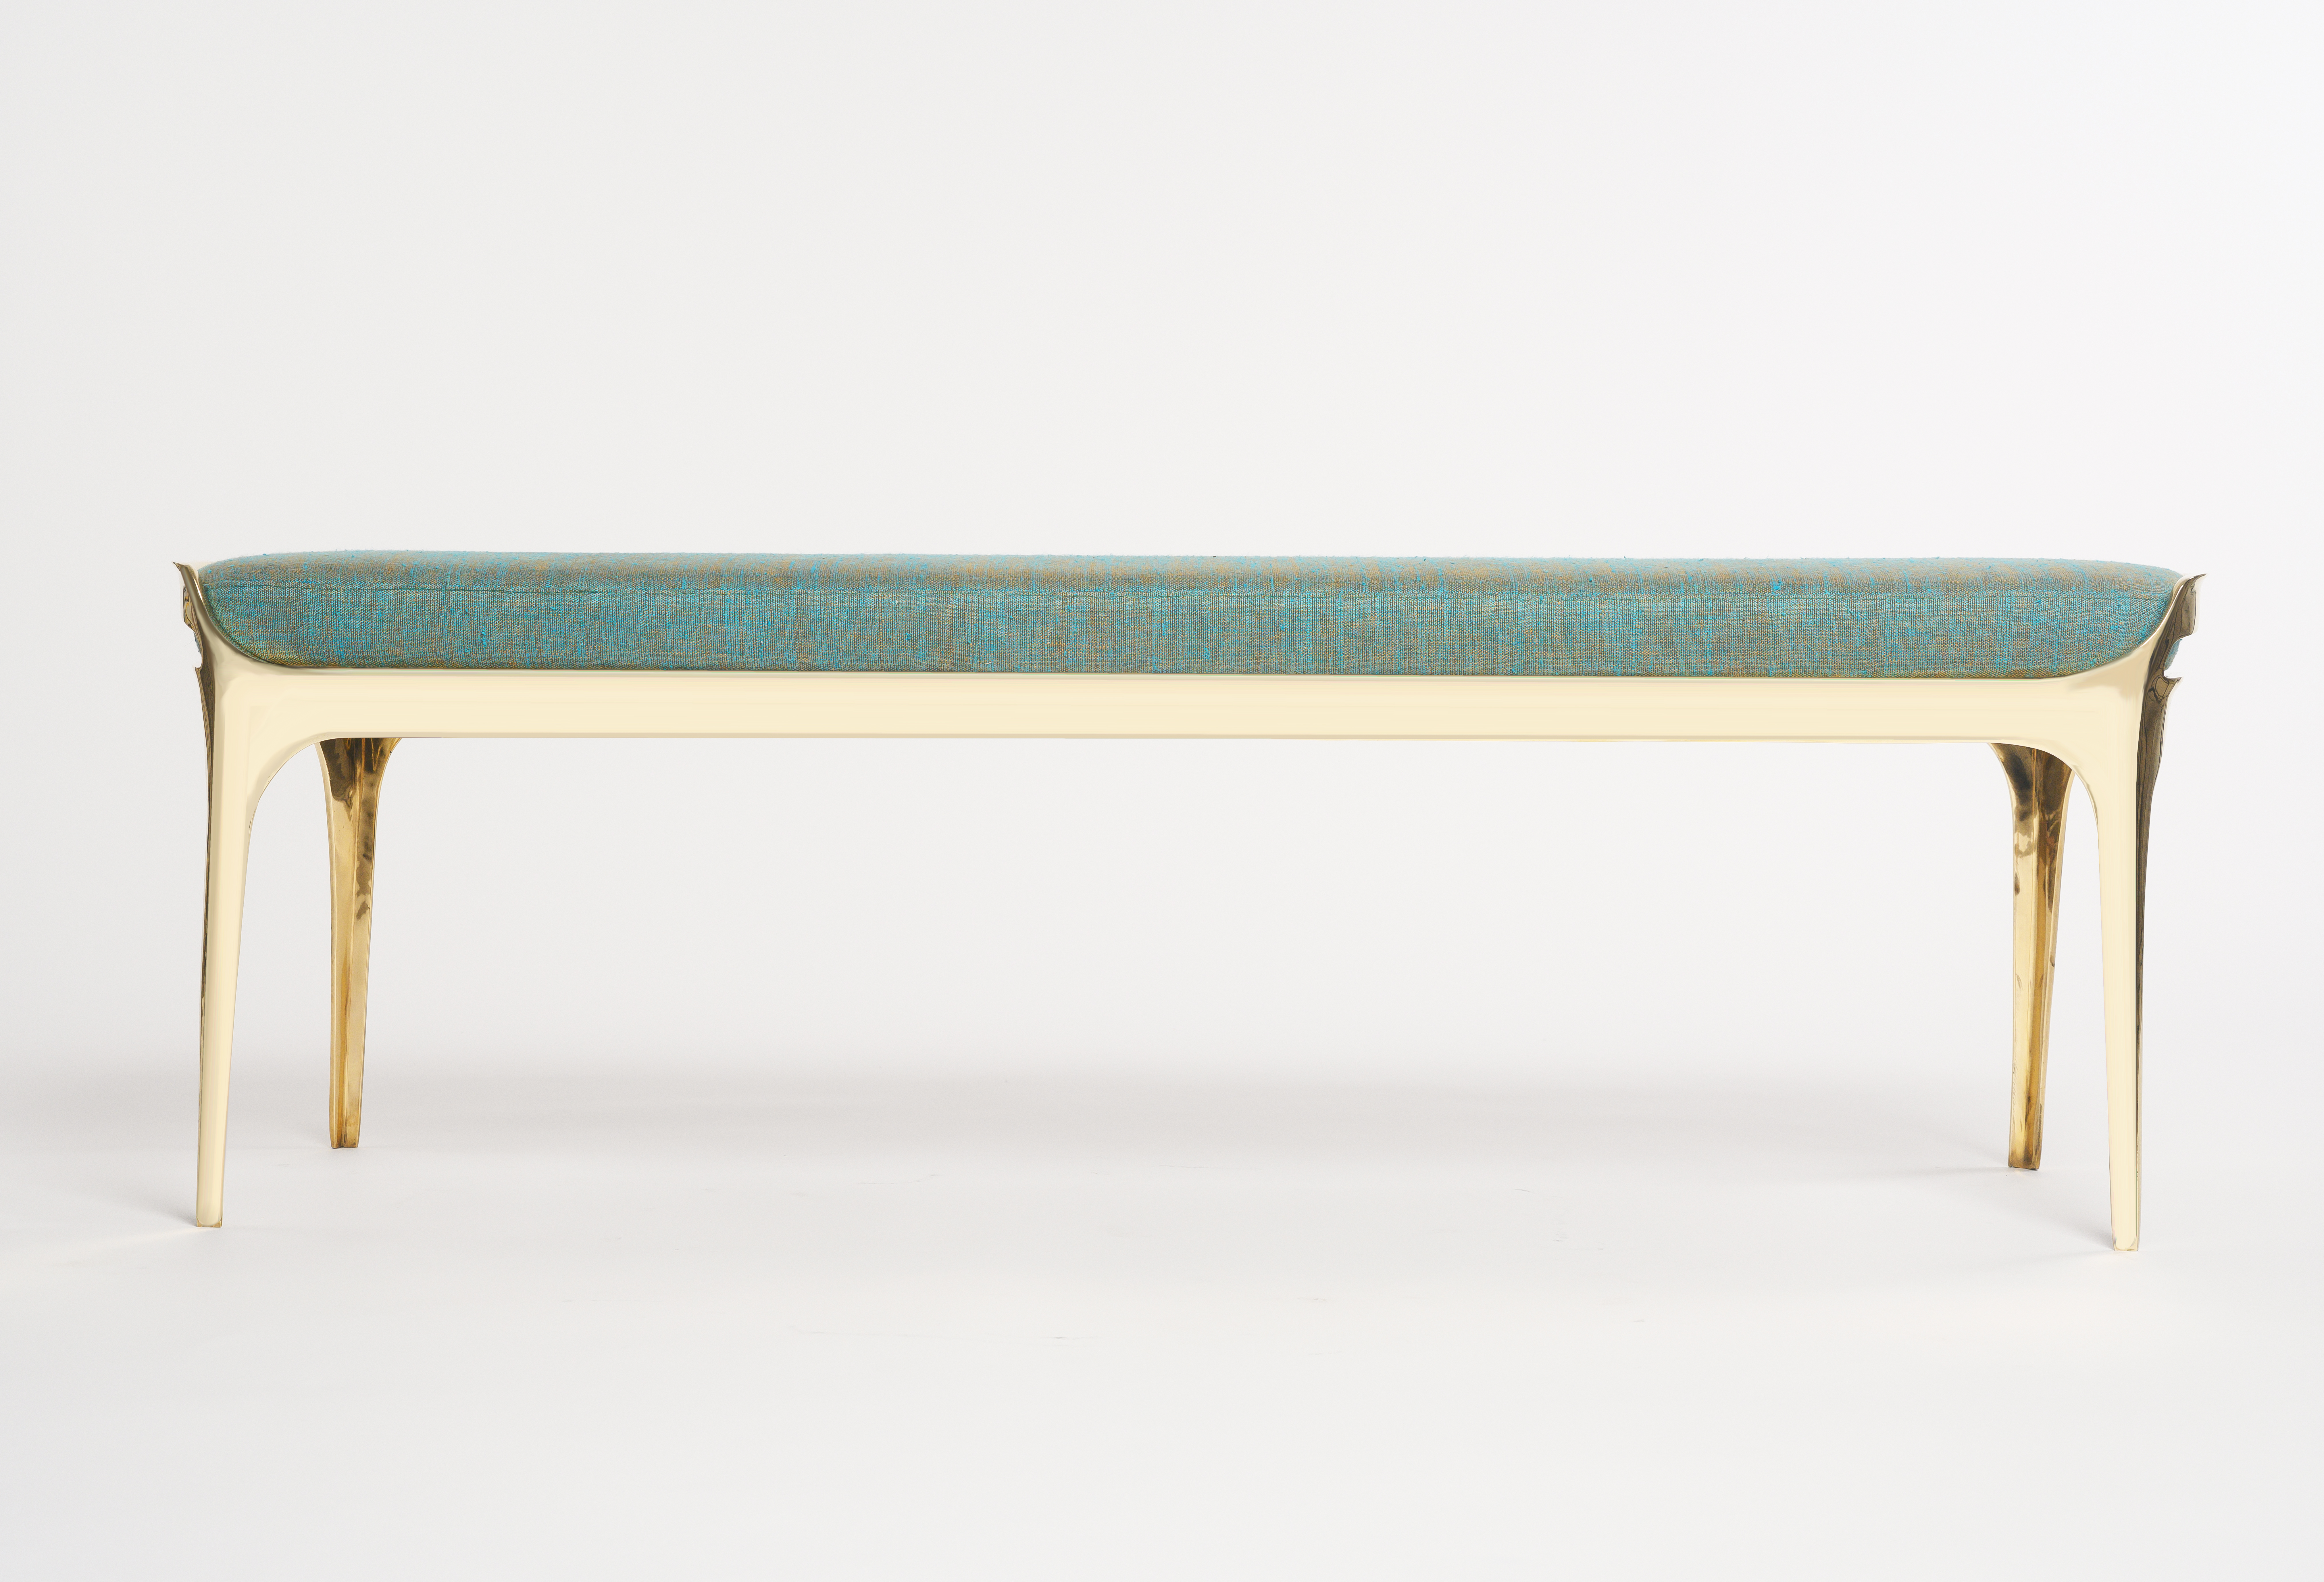 NYDC_WNWN_products_david_sutherland_elain_atelier_Bruda_bench_BEE_4946BEE_5207